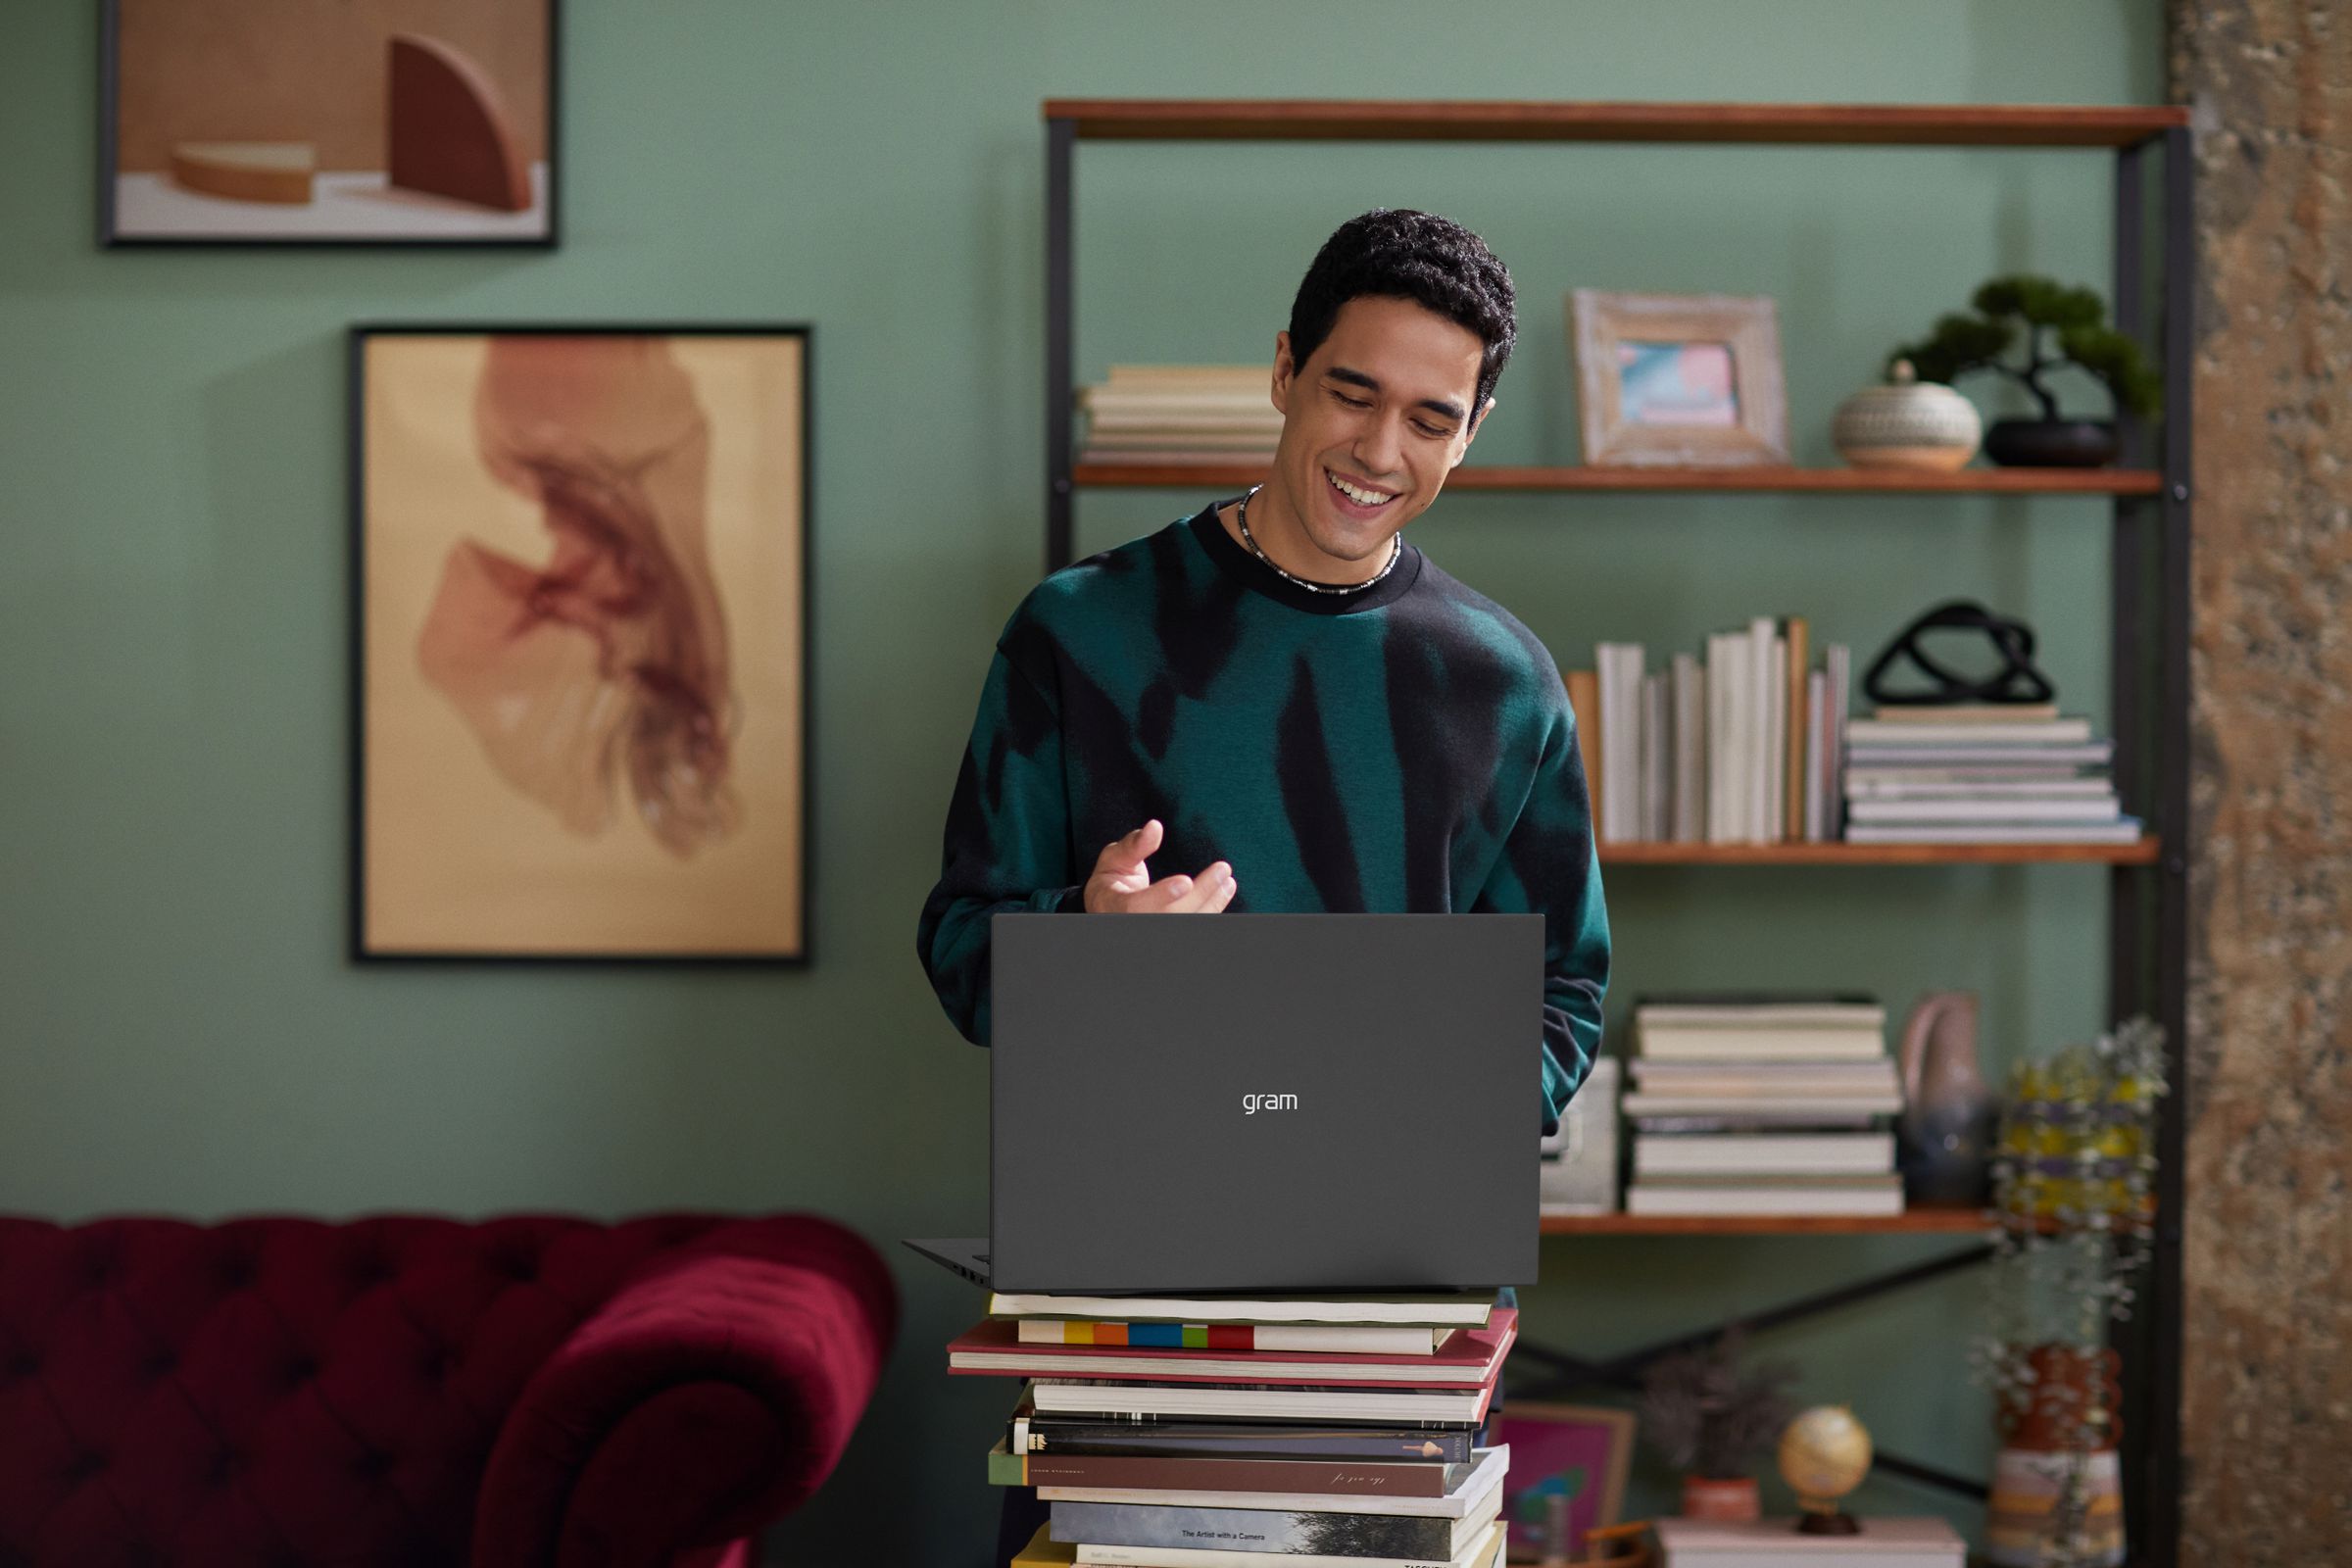 A user video chats on an LG Gram laptop with a bookshelf in the background.